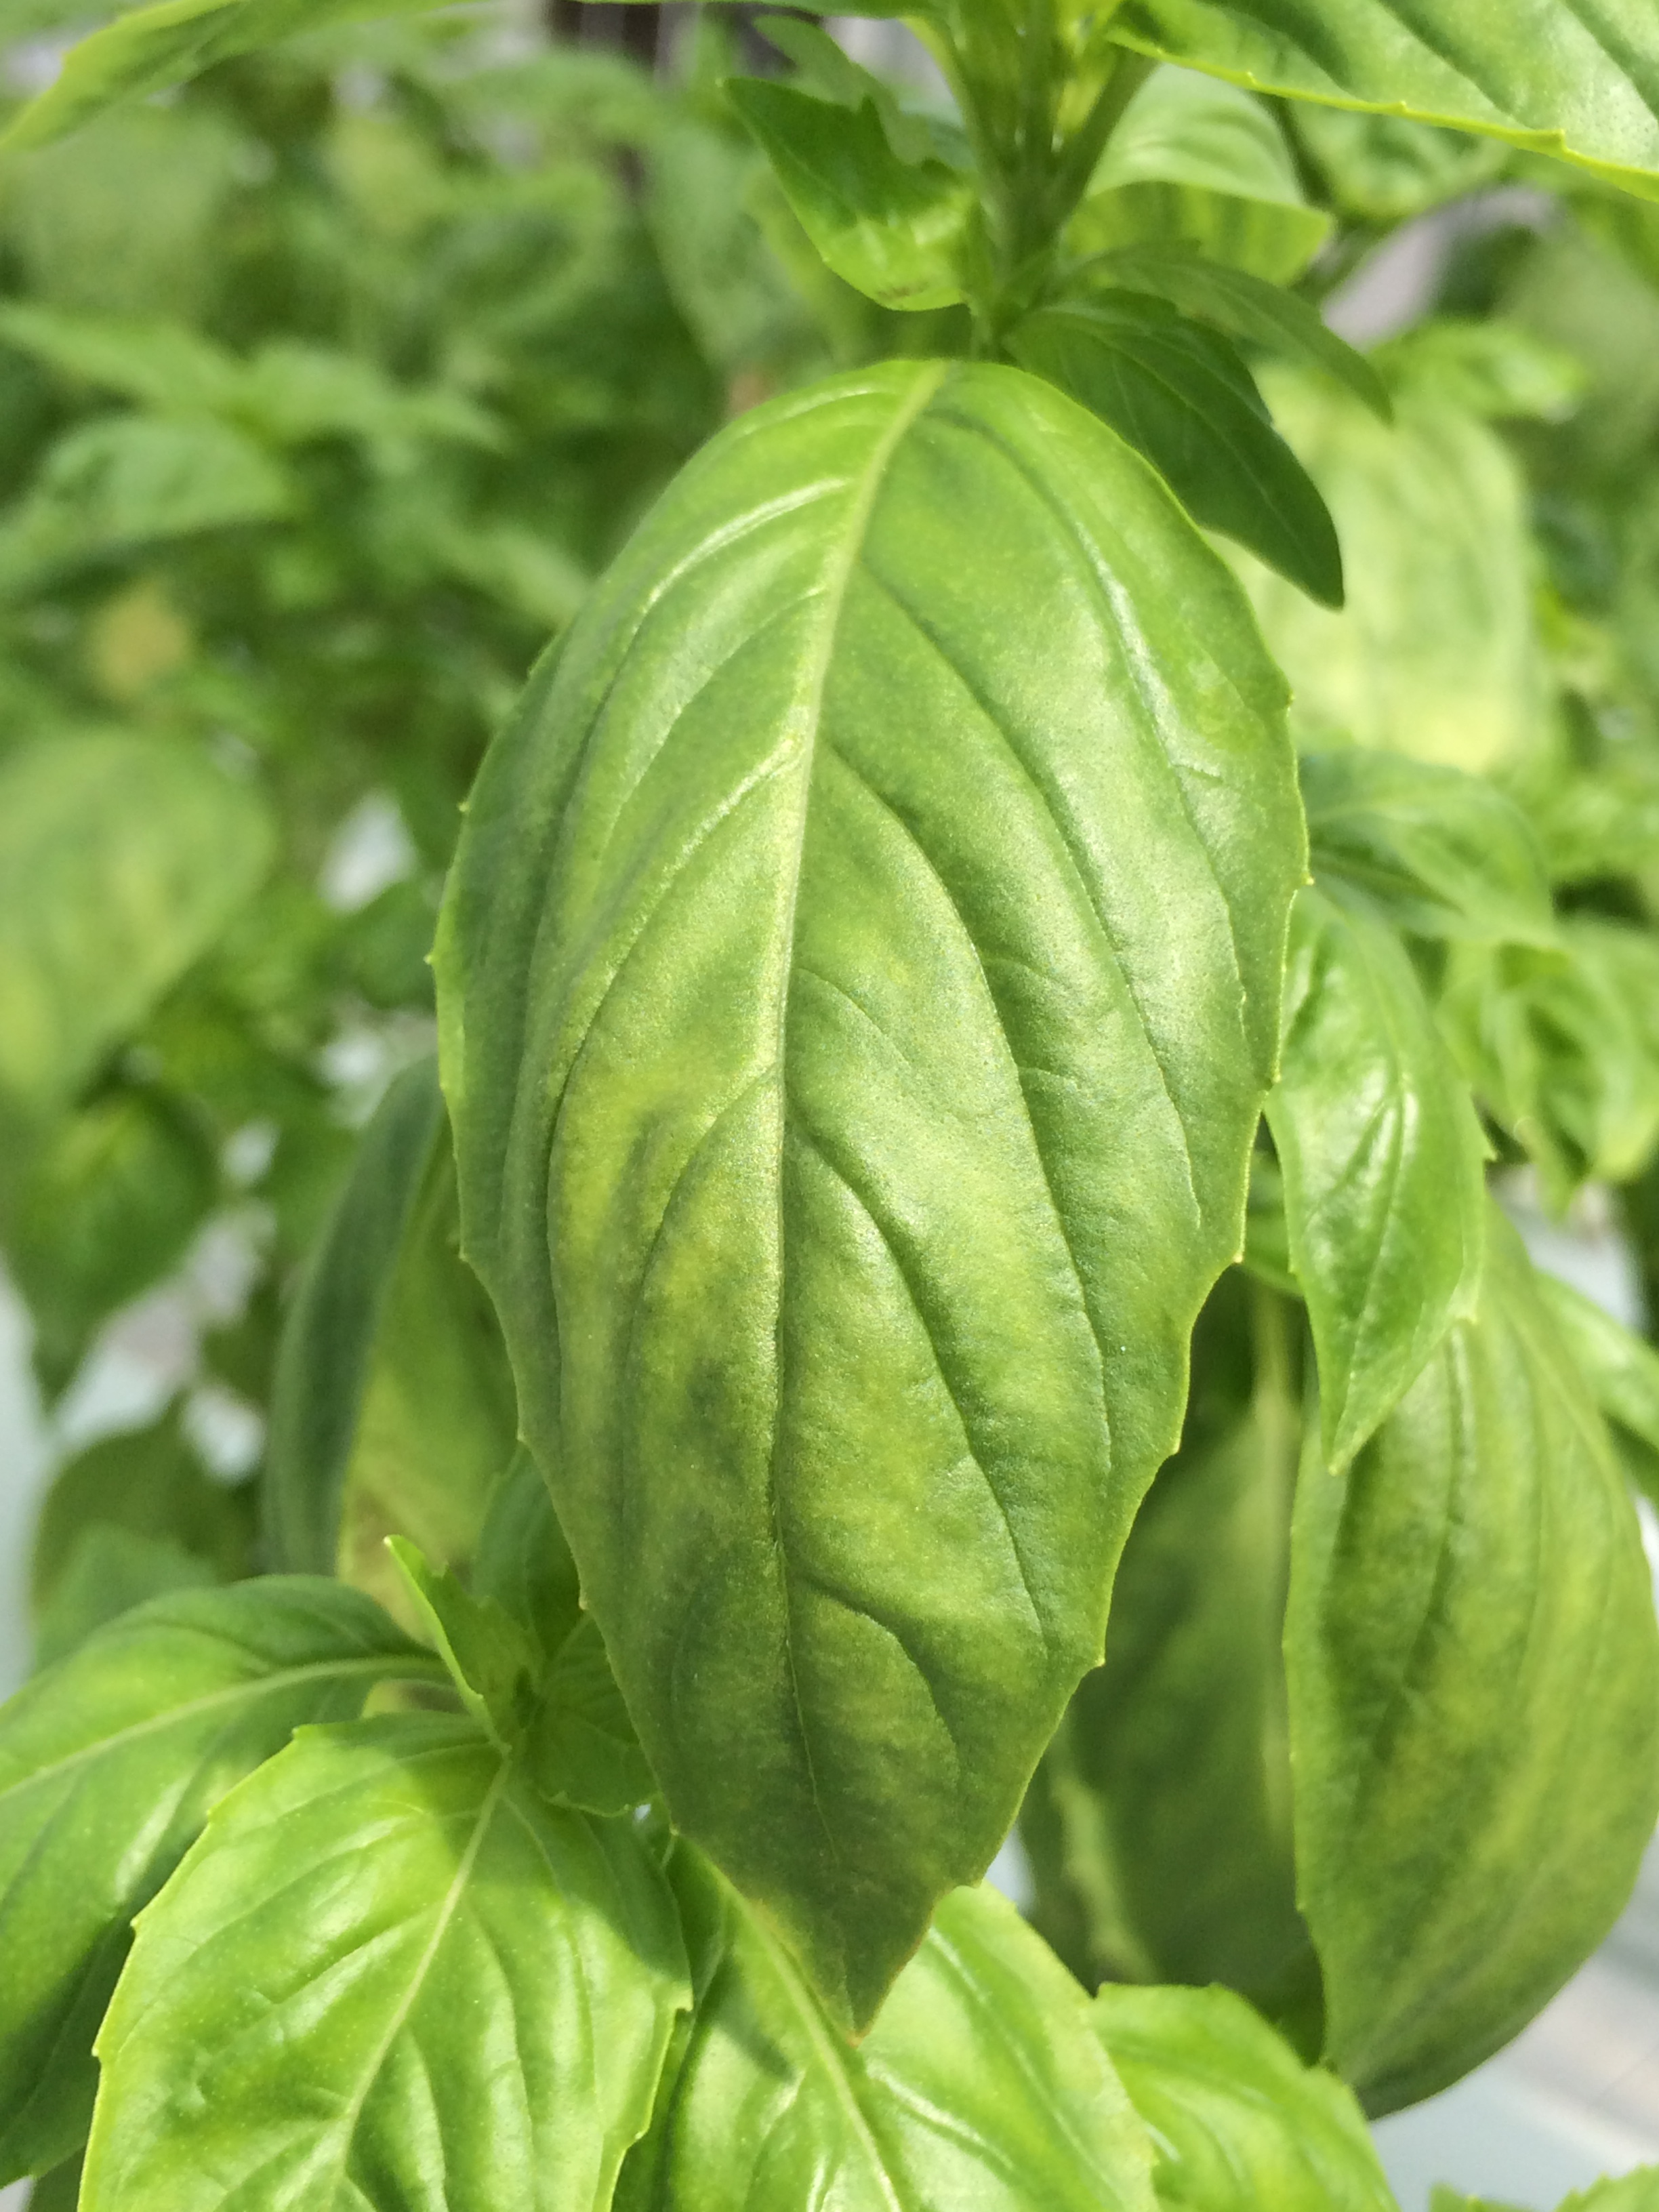 Symptoms of basil downy mildew on the upper leaf surface.